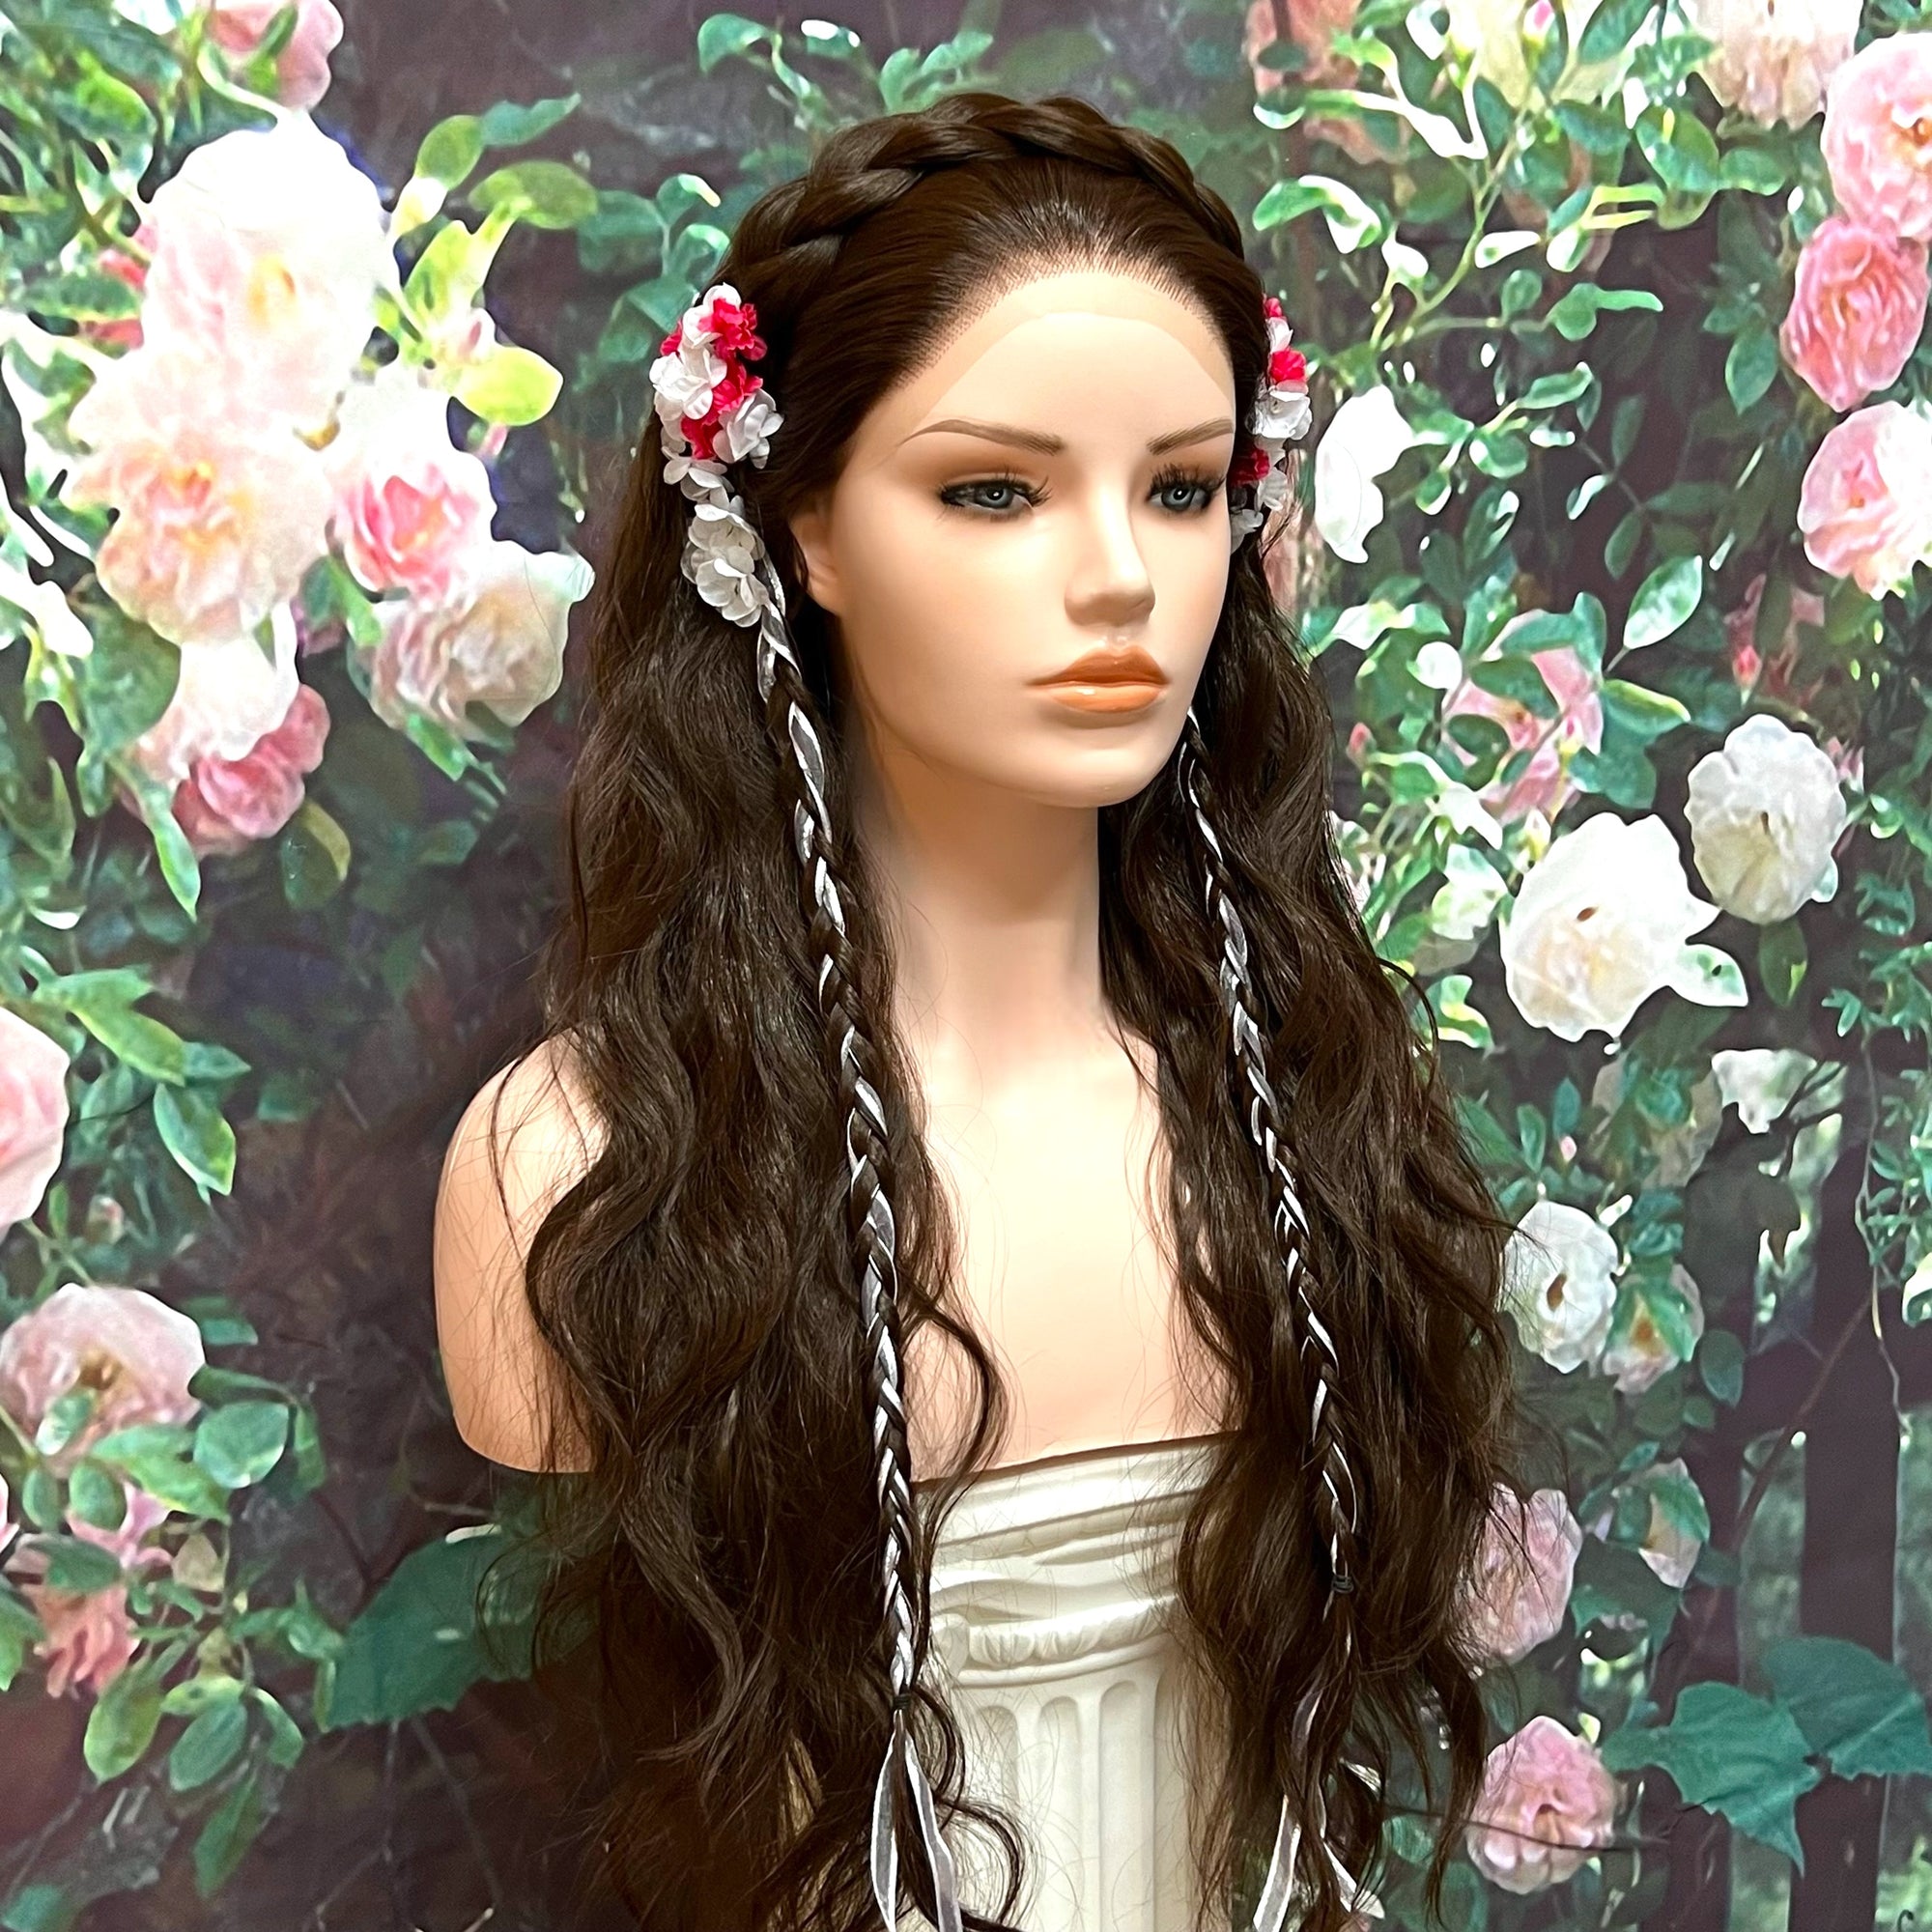 medieval hairstyles - Google Search | Braided crown hairstyles, Long hair  styles, Hair styles